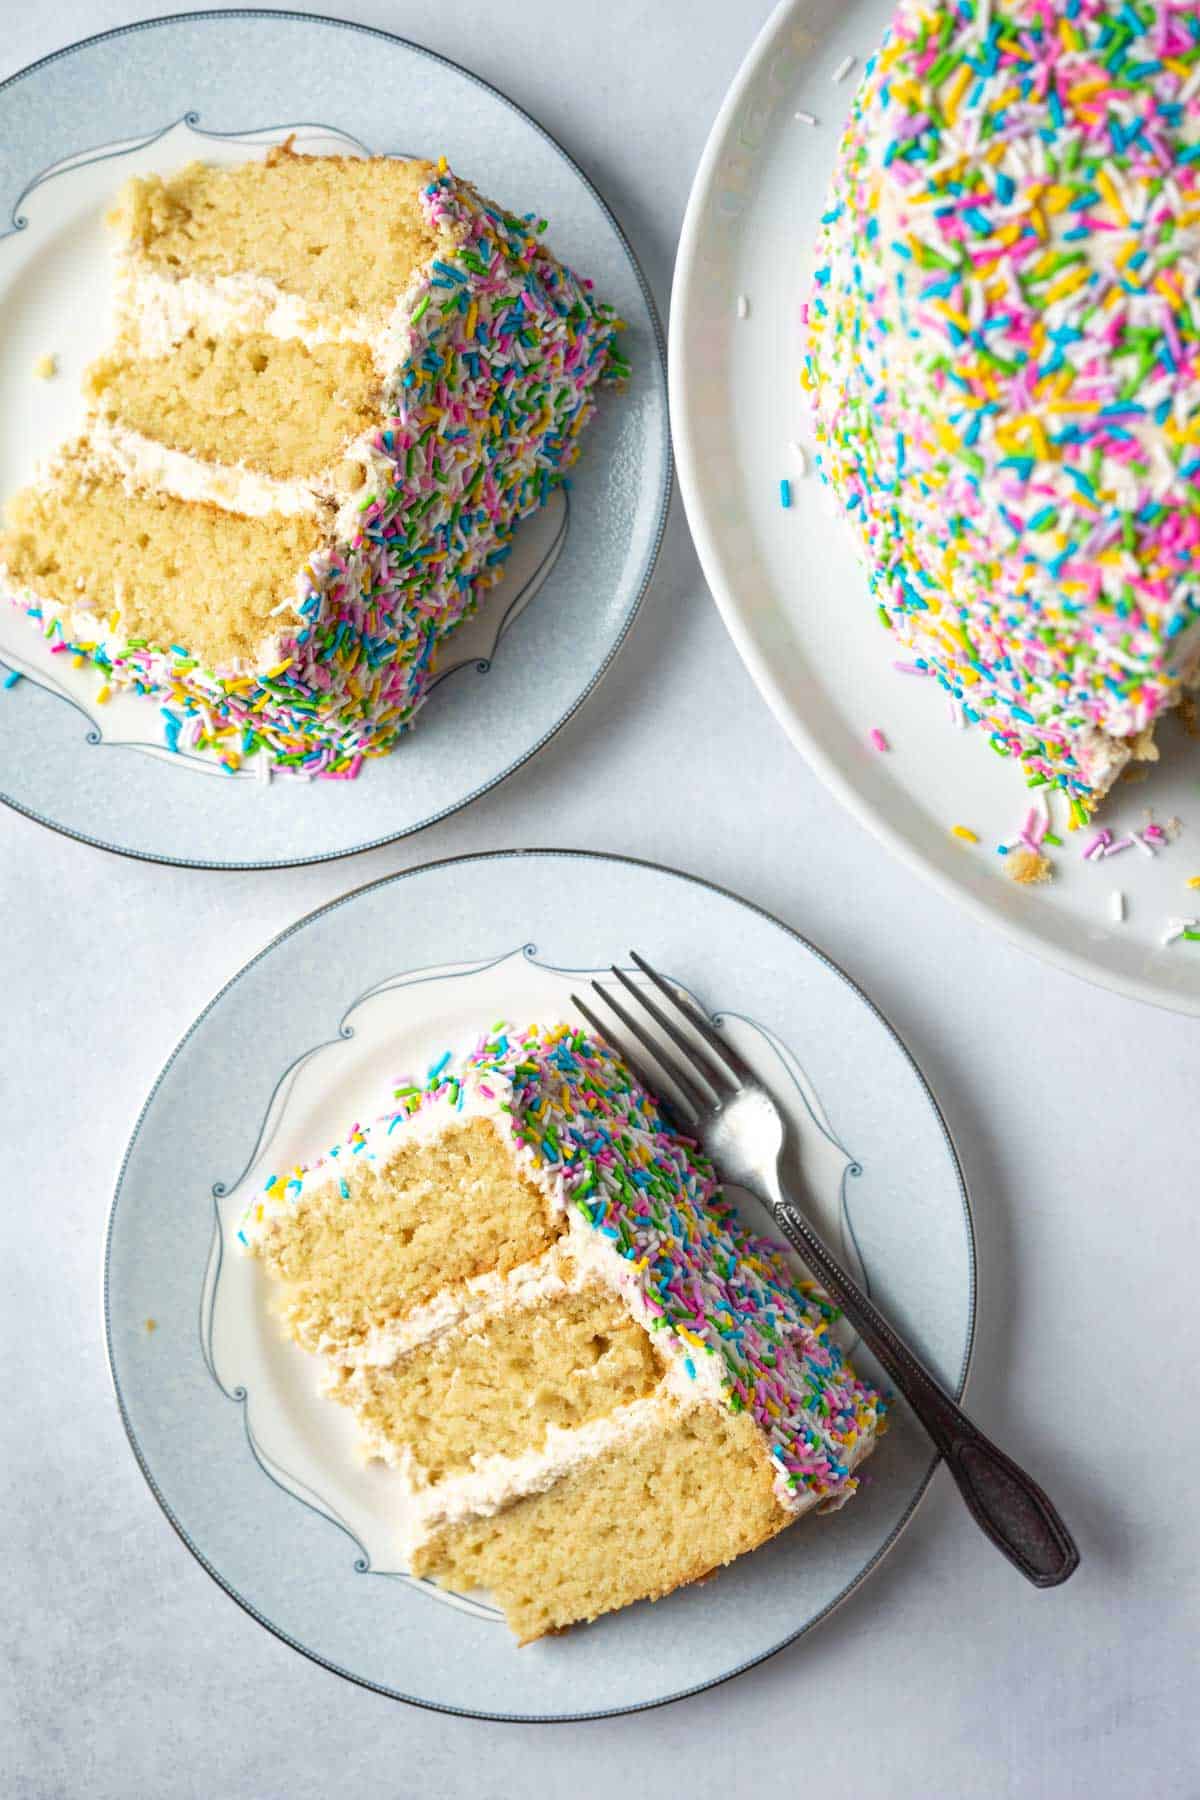 Two slices of vanilla sprinkle cake on plates.